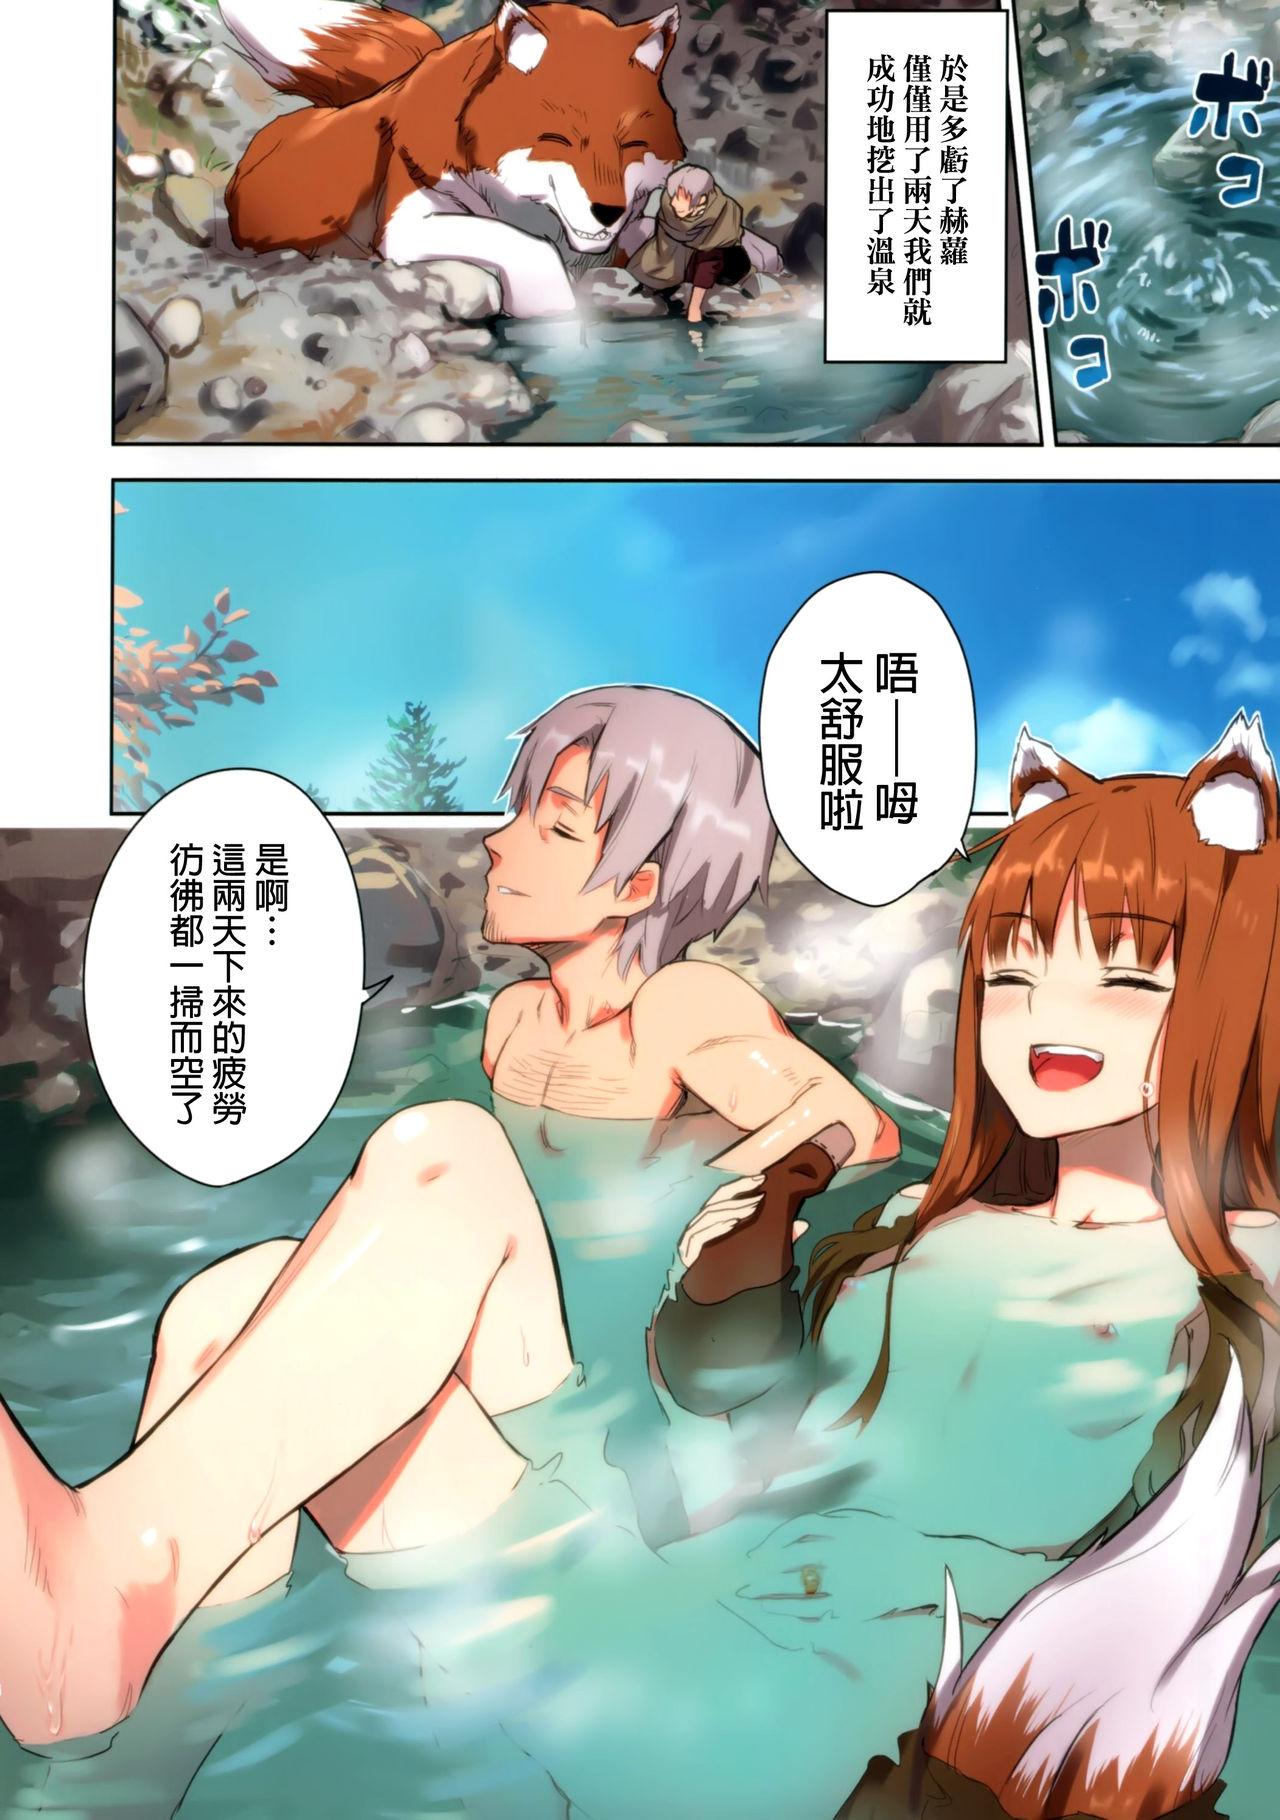 Humiliation Pov Wacchi to Nyohhira Bon FULL COLOR - Spice and wolf Gay Cumjerkingoff - Page 7